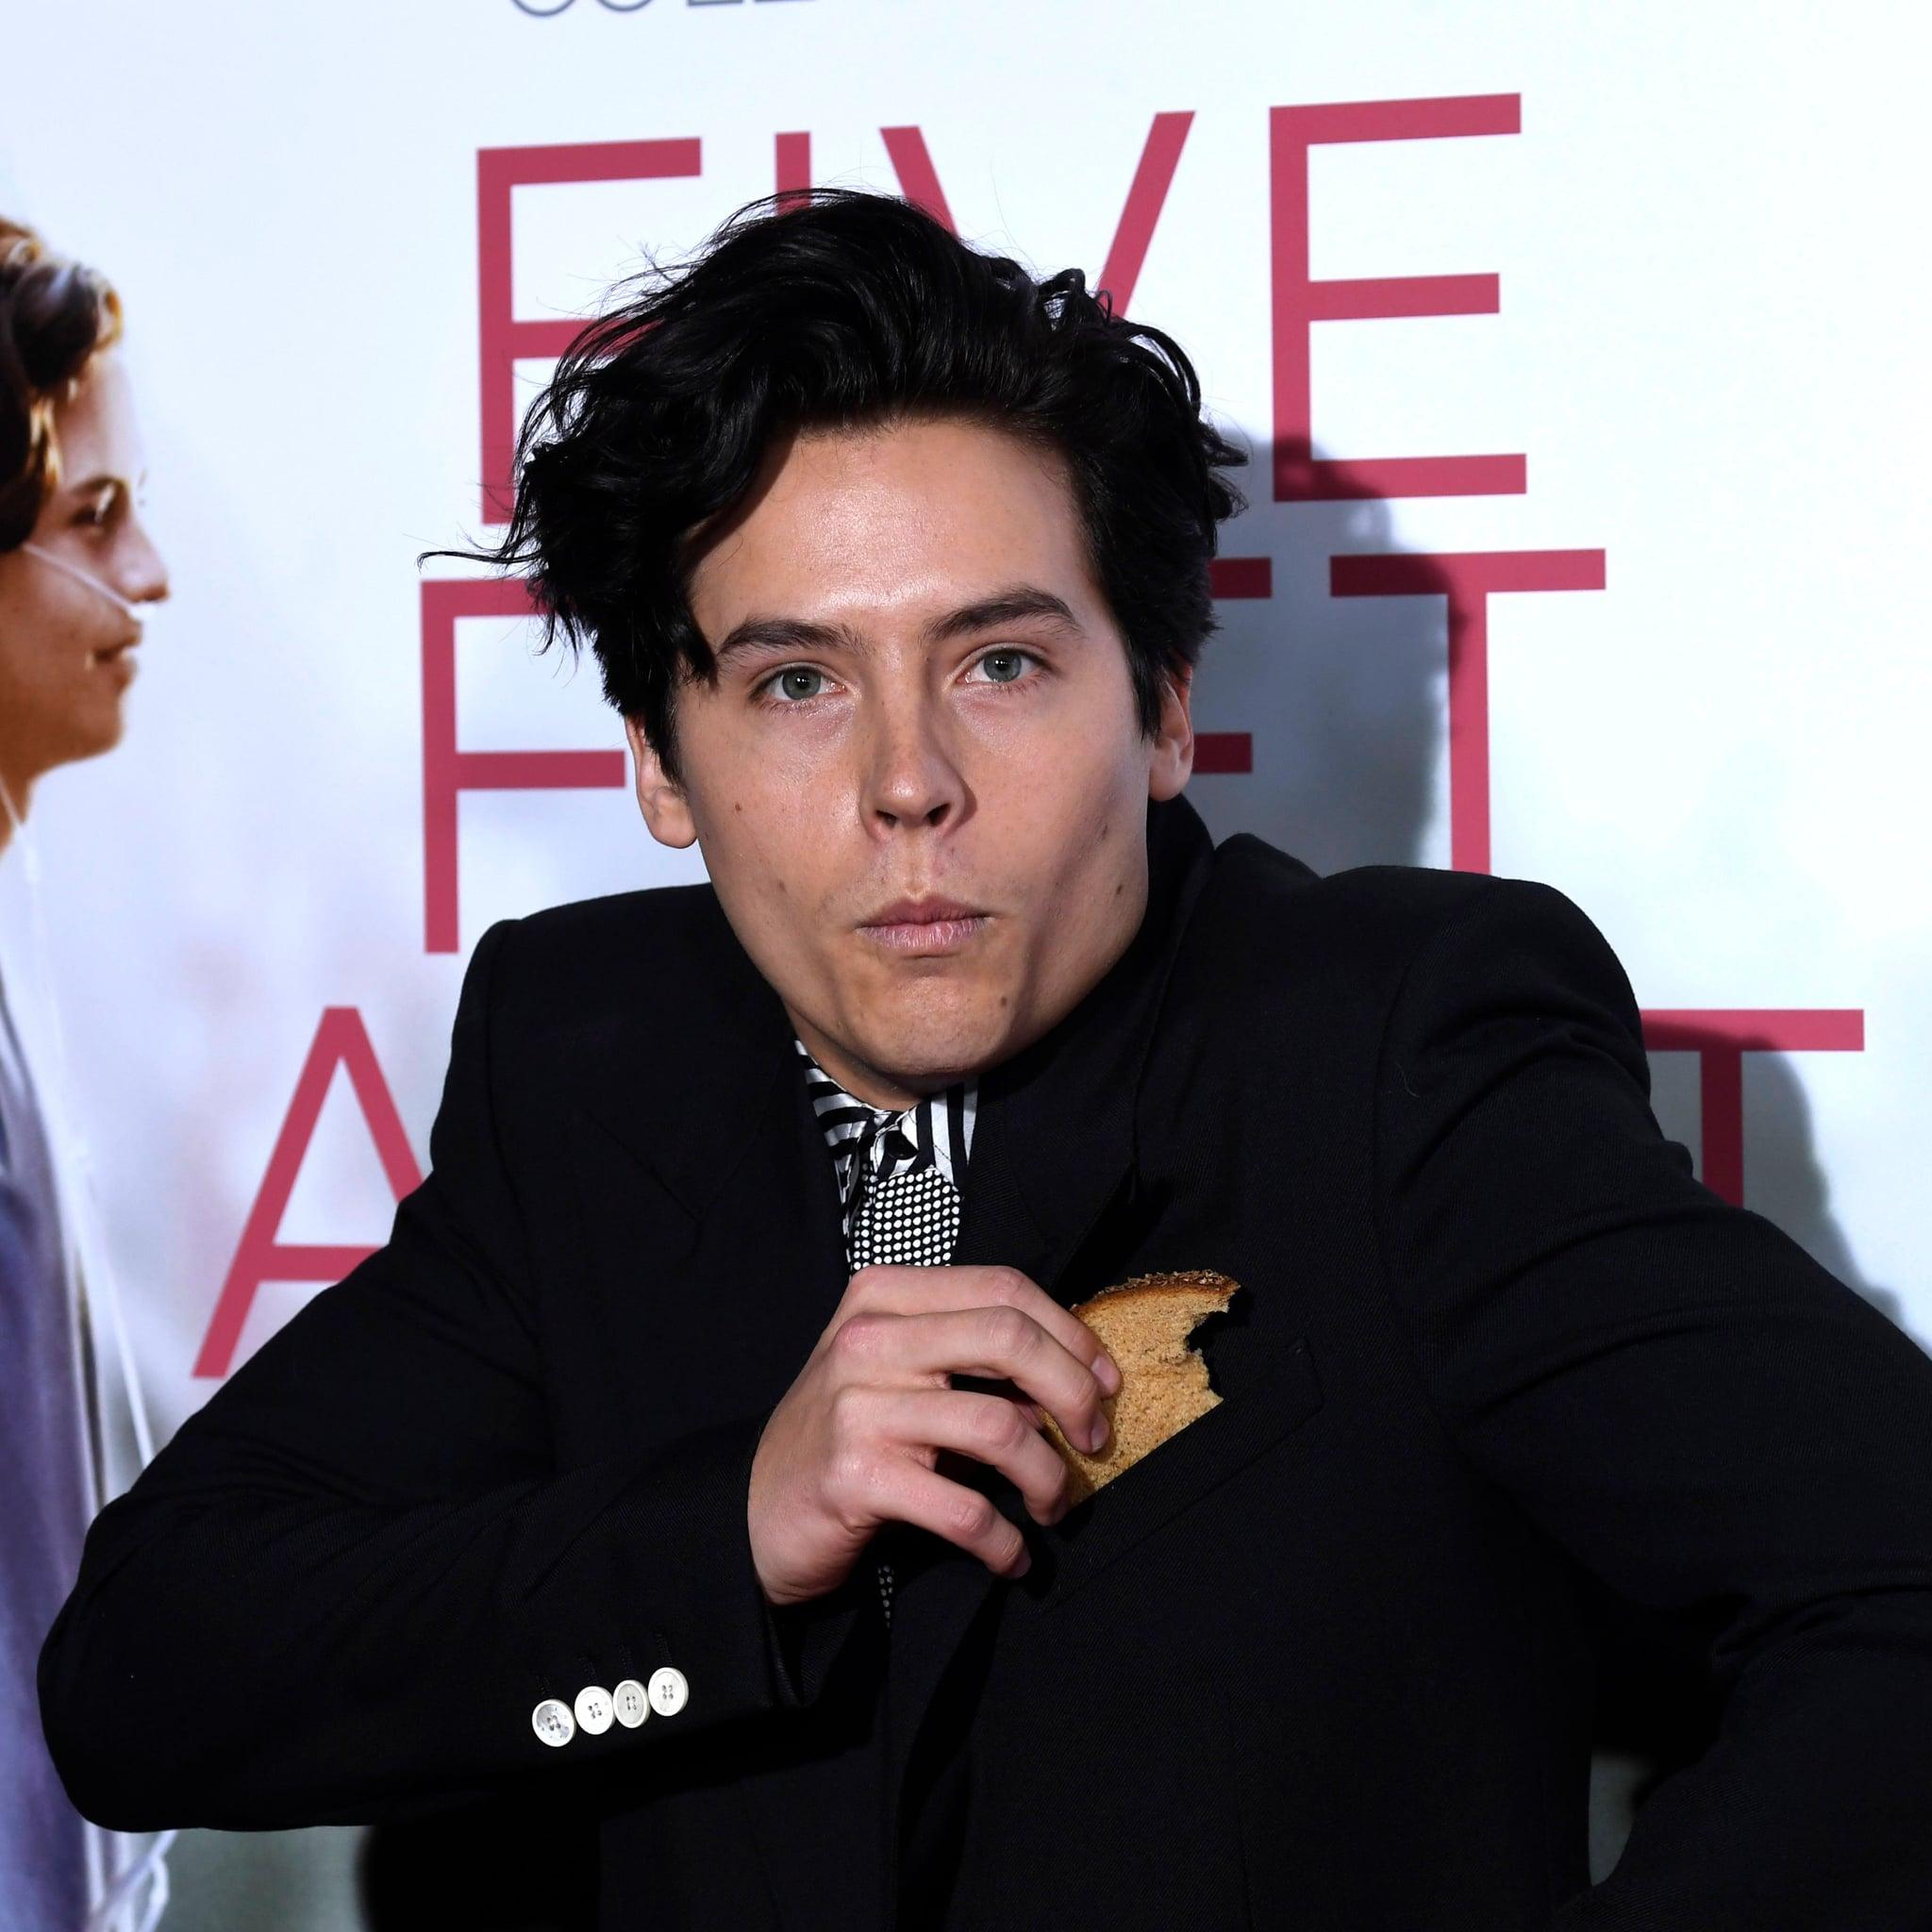 Cole Sprouse Brings Bread to Five Feet Apart Premiere. POPSUGAR